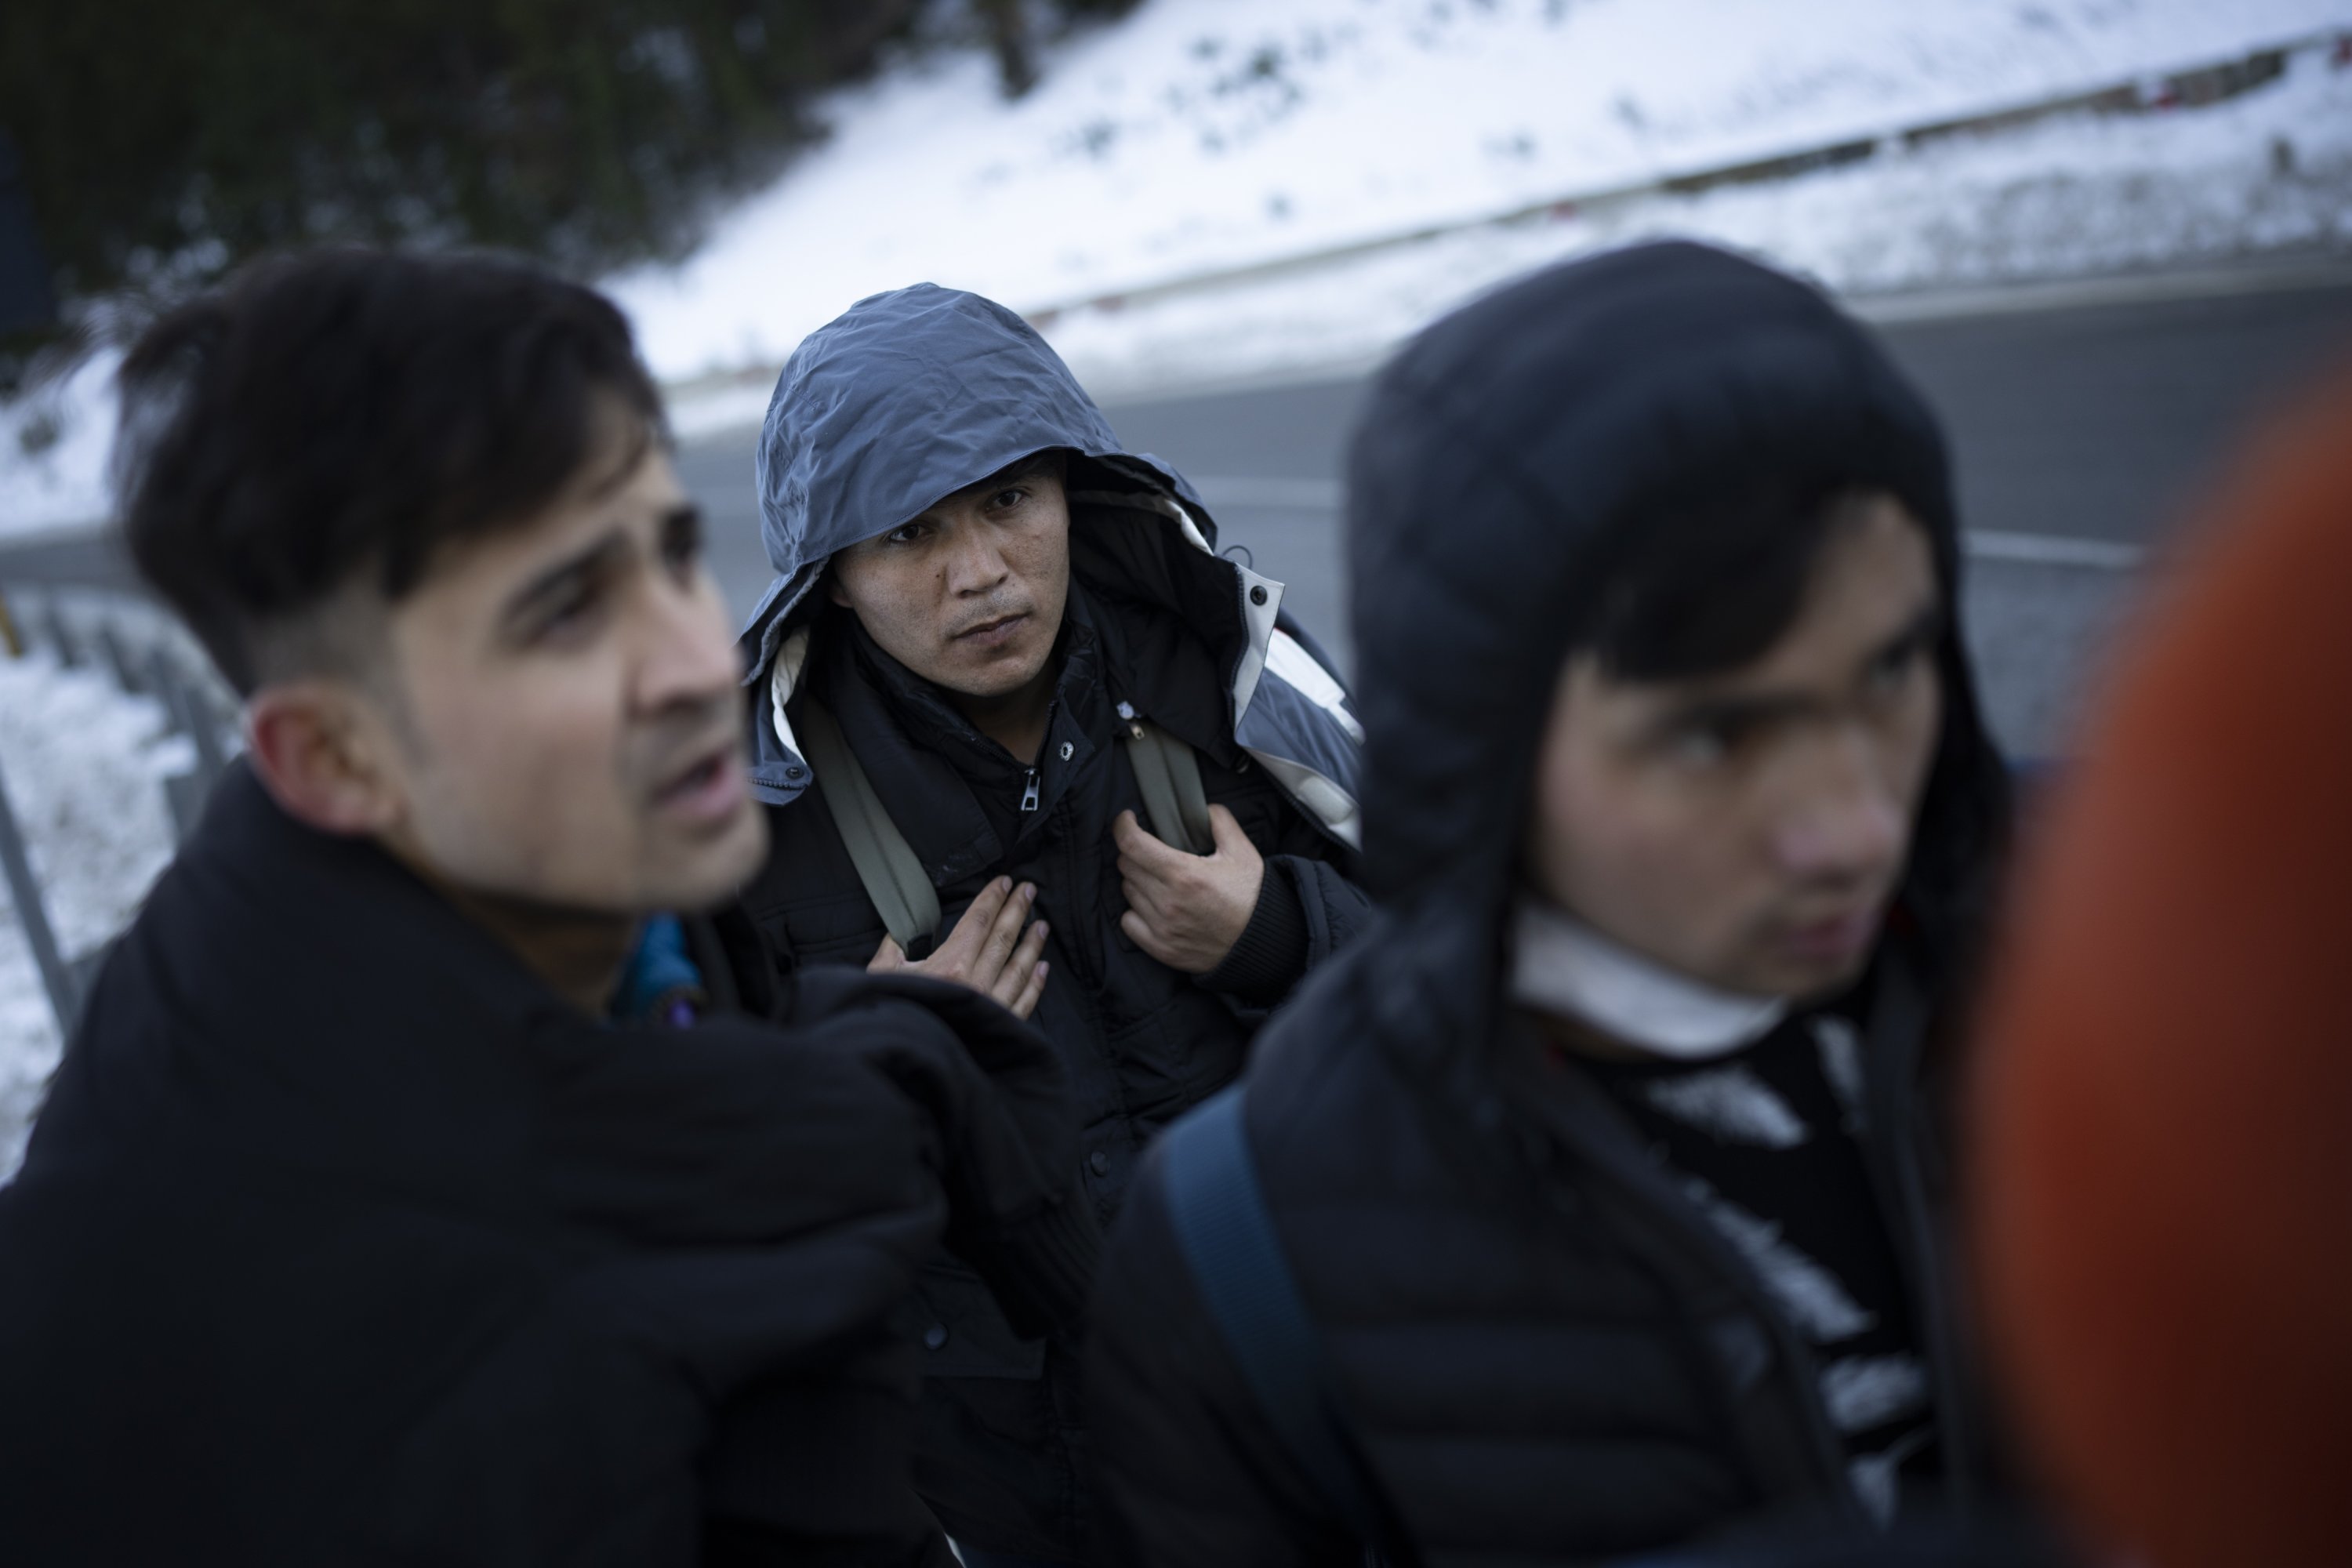 Afghan migrants headed to France from Italy walk along a mountain road leading to the French-Italian border, Dec. 15, 2021. (AP Photo)